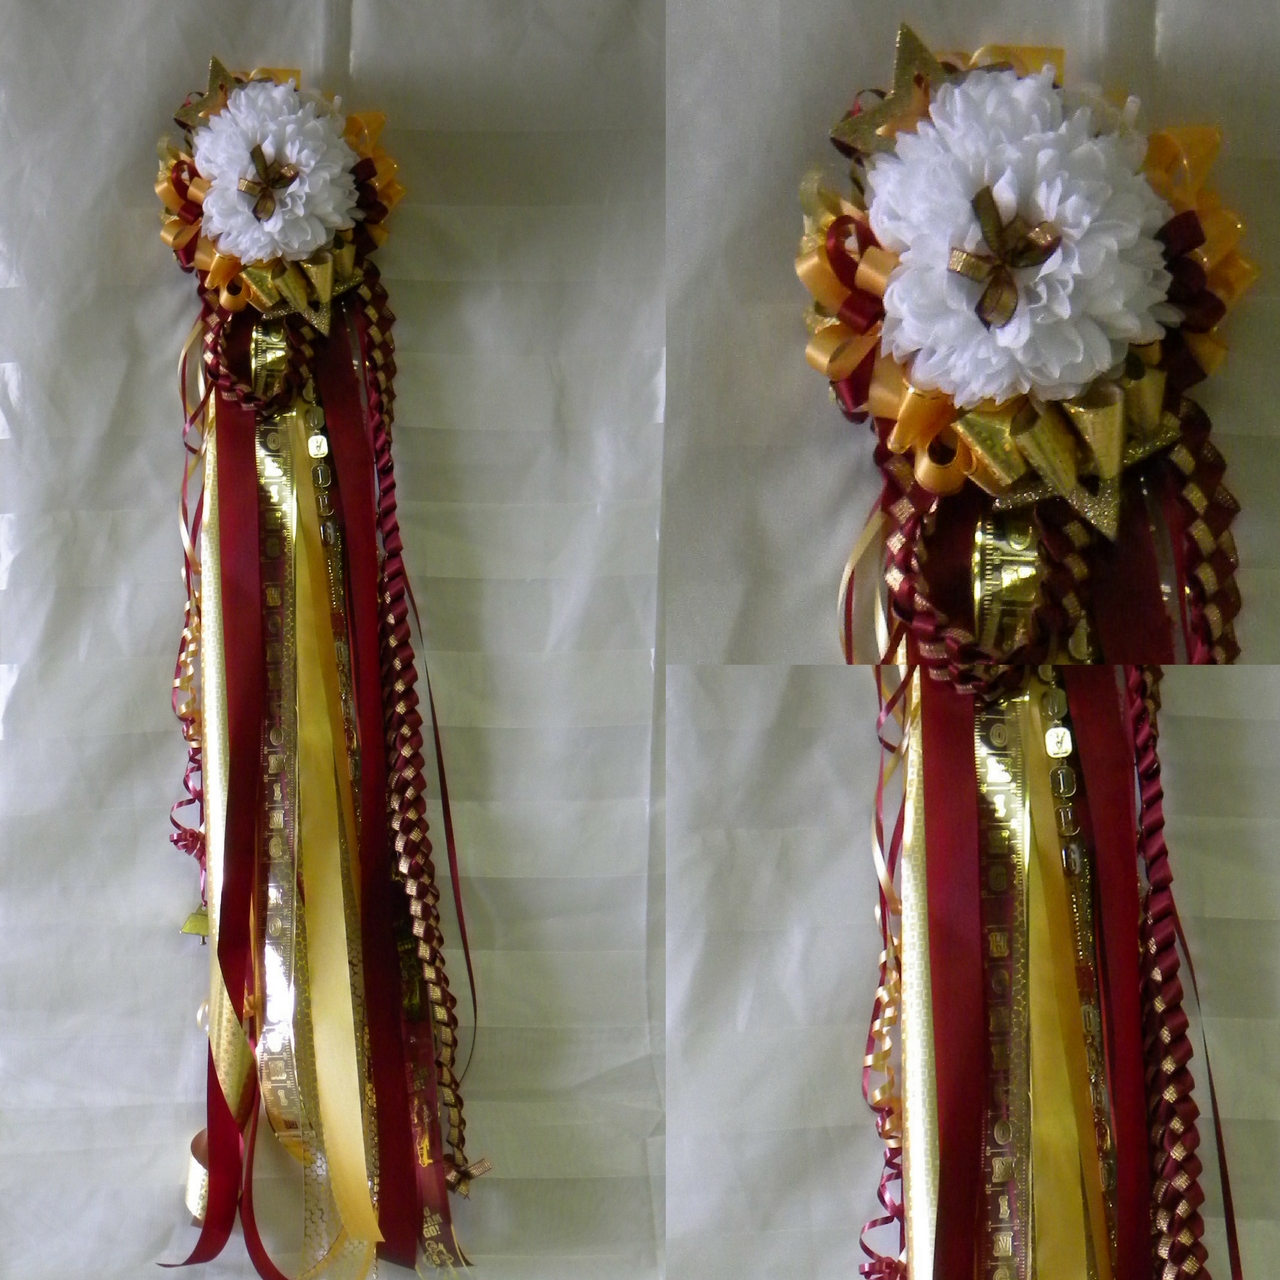 Deer Park High School Homecoming mums Texas delivery 2